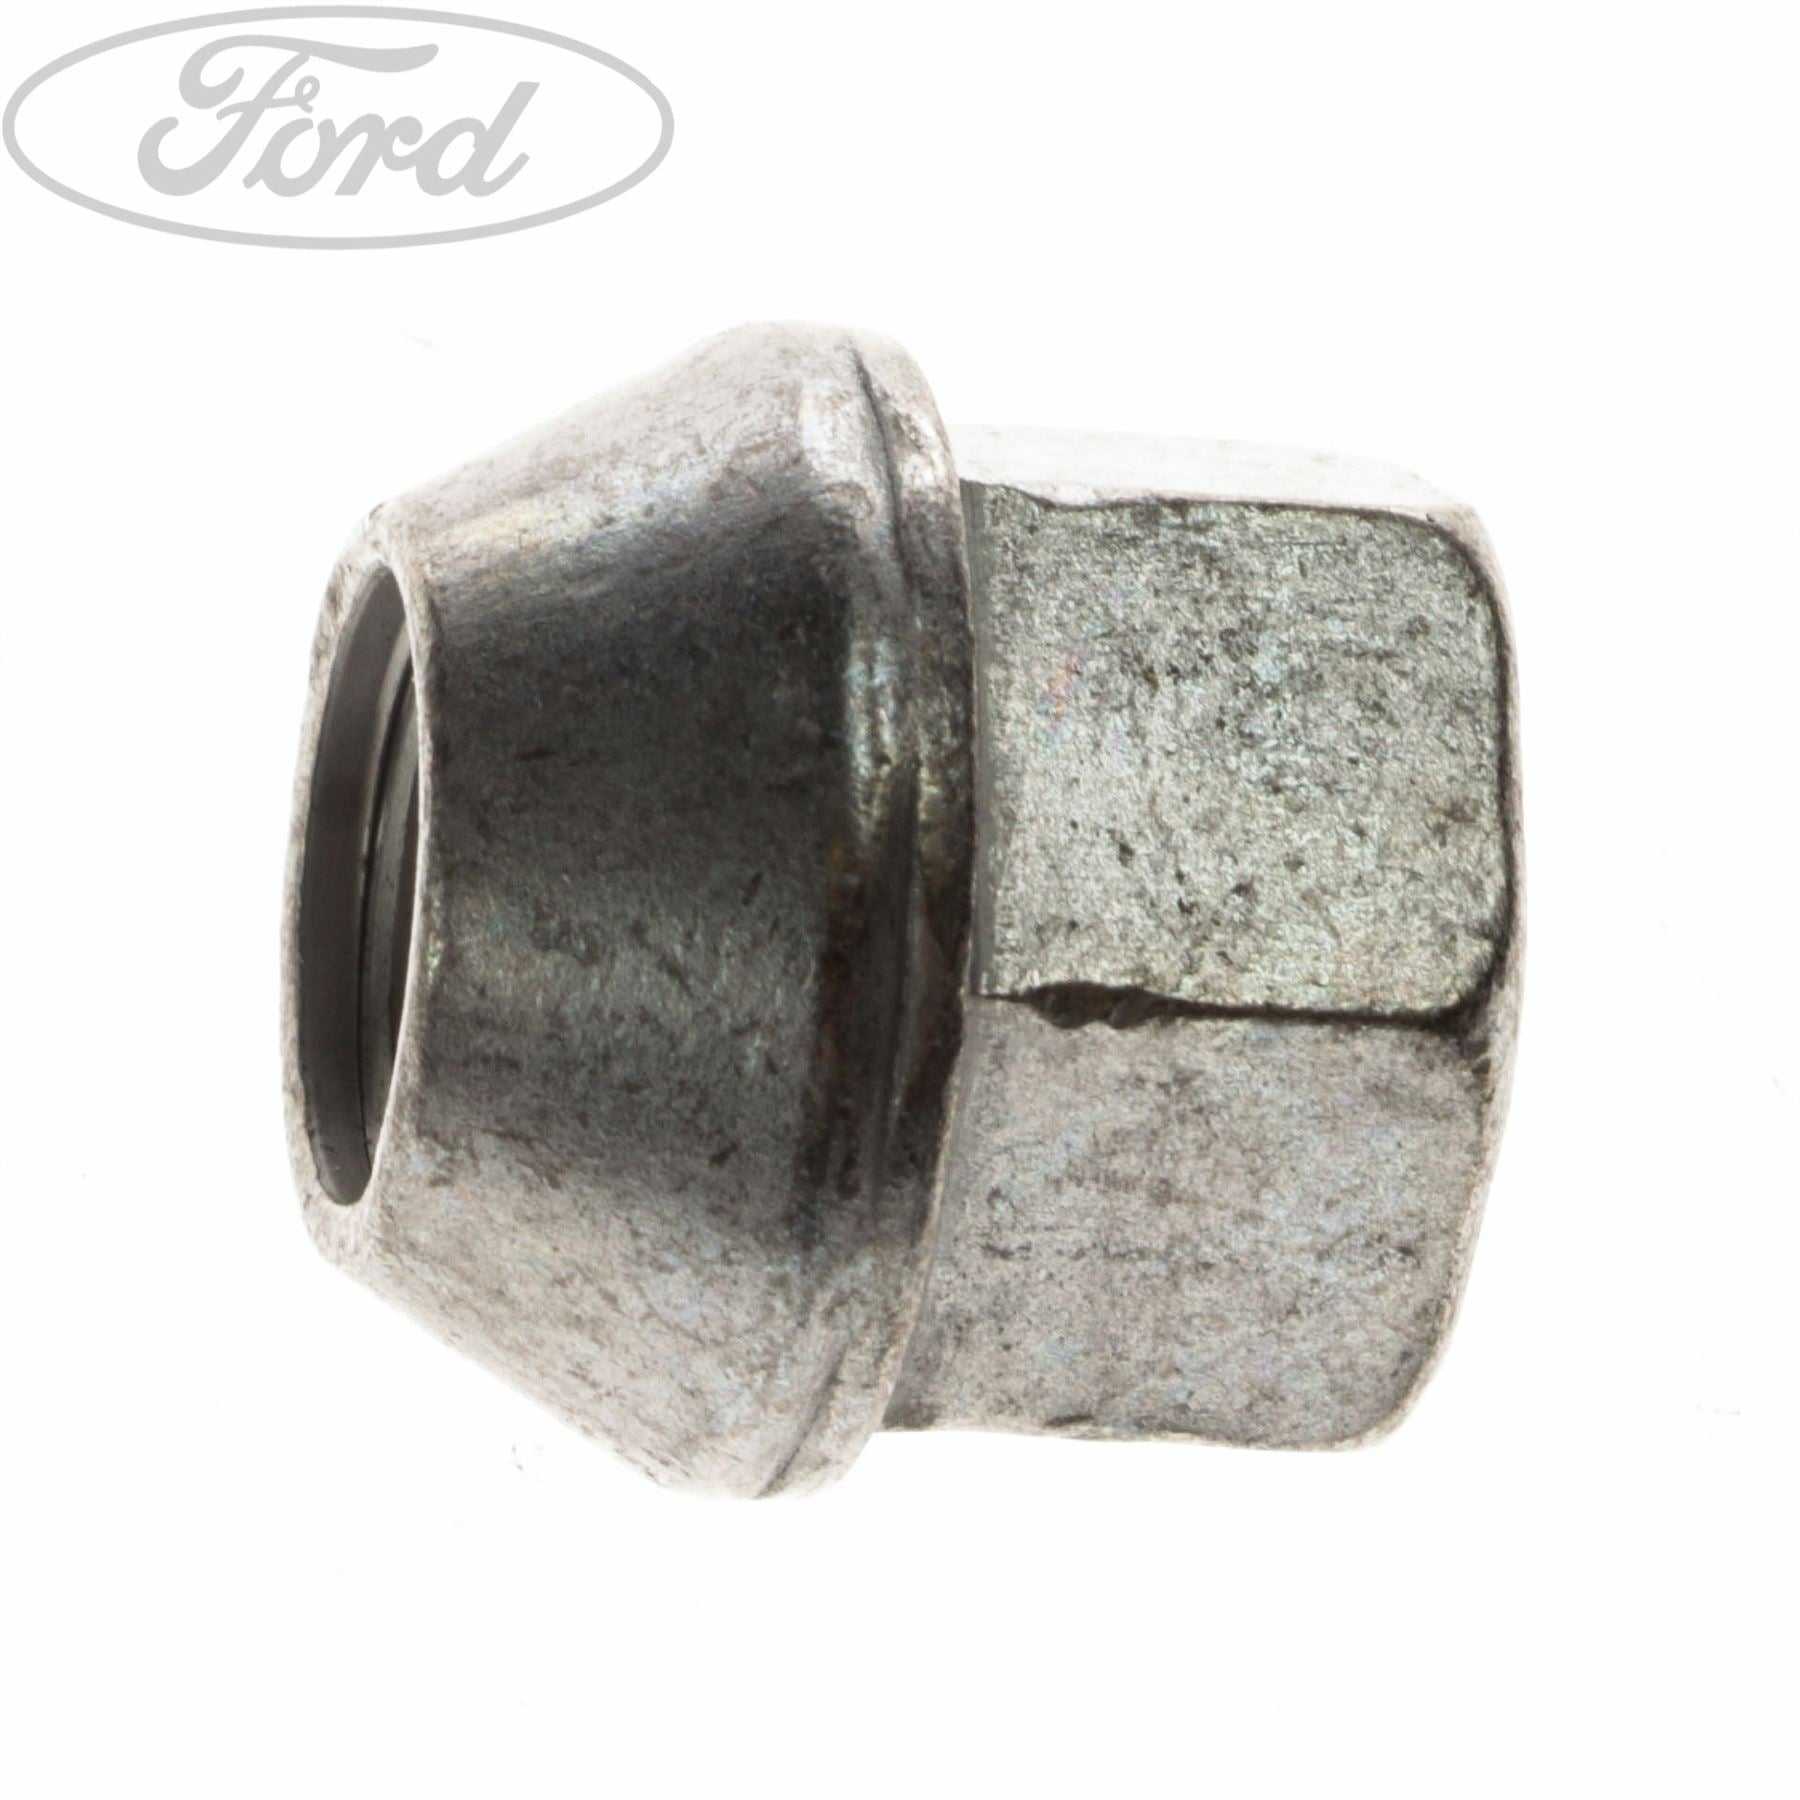 Ford, TRANSIT CONNECT STEEL WHEEL NUT X1 M12 X1.5MM 2002-2013